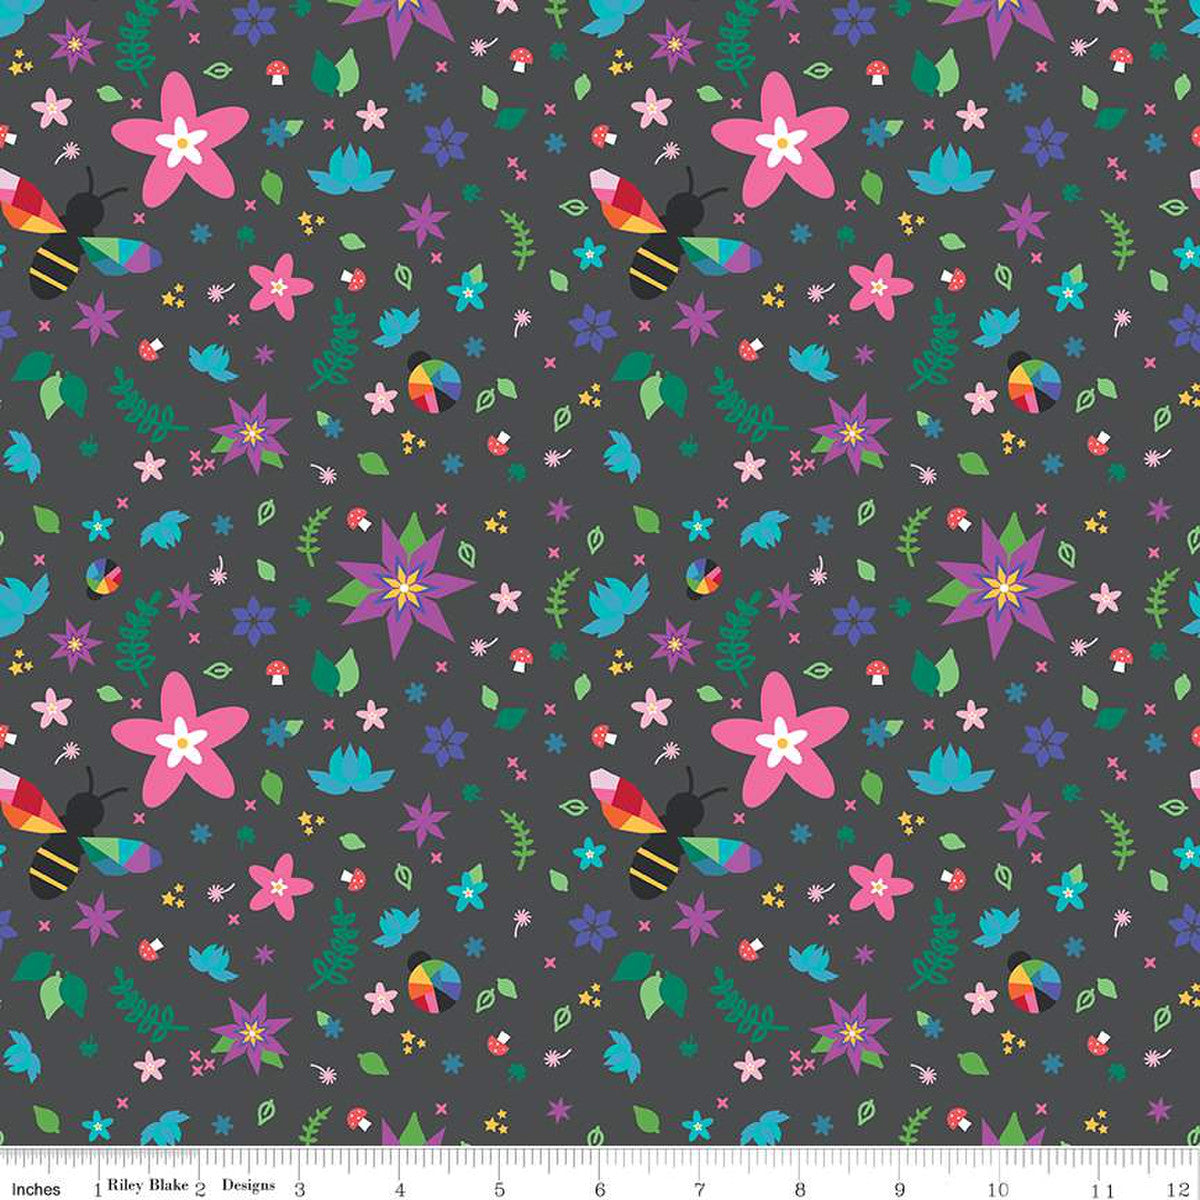 Bloom Main Charcoal Yardage by Kristy Lea of Quiet Play | Riley Blake Designs #C14980-CHARCOAL